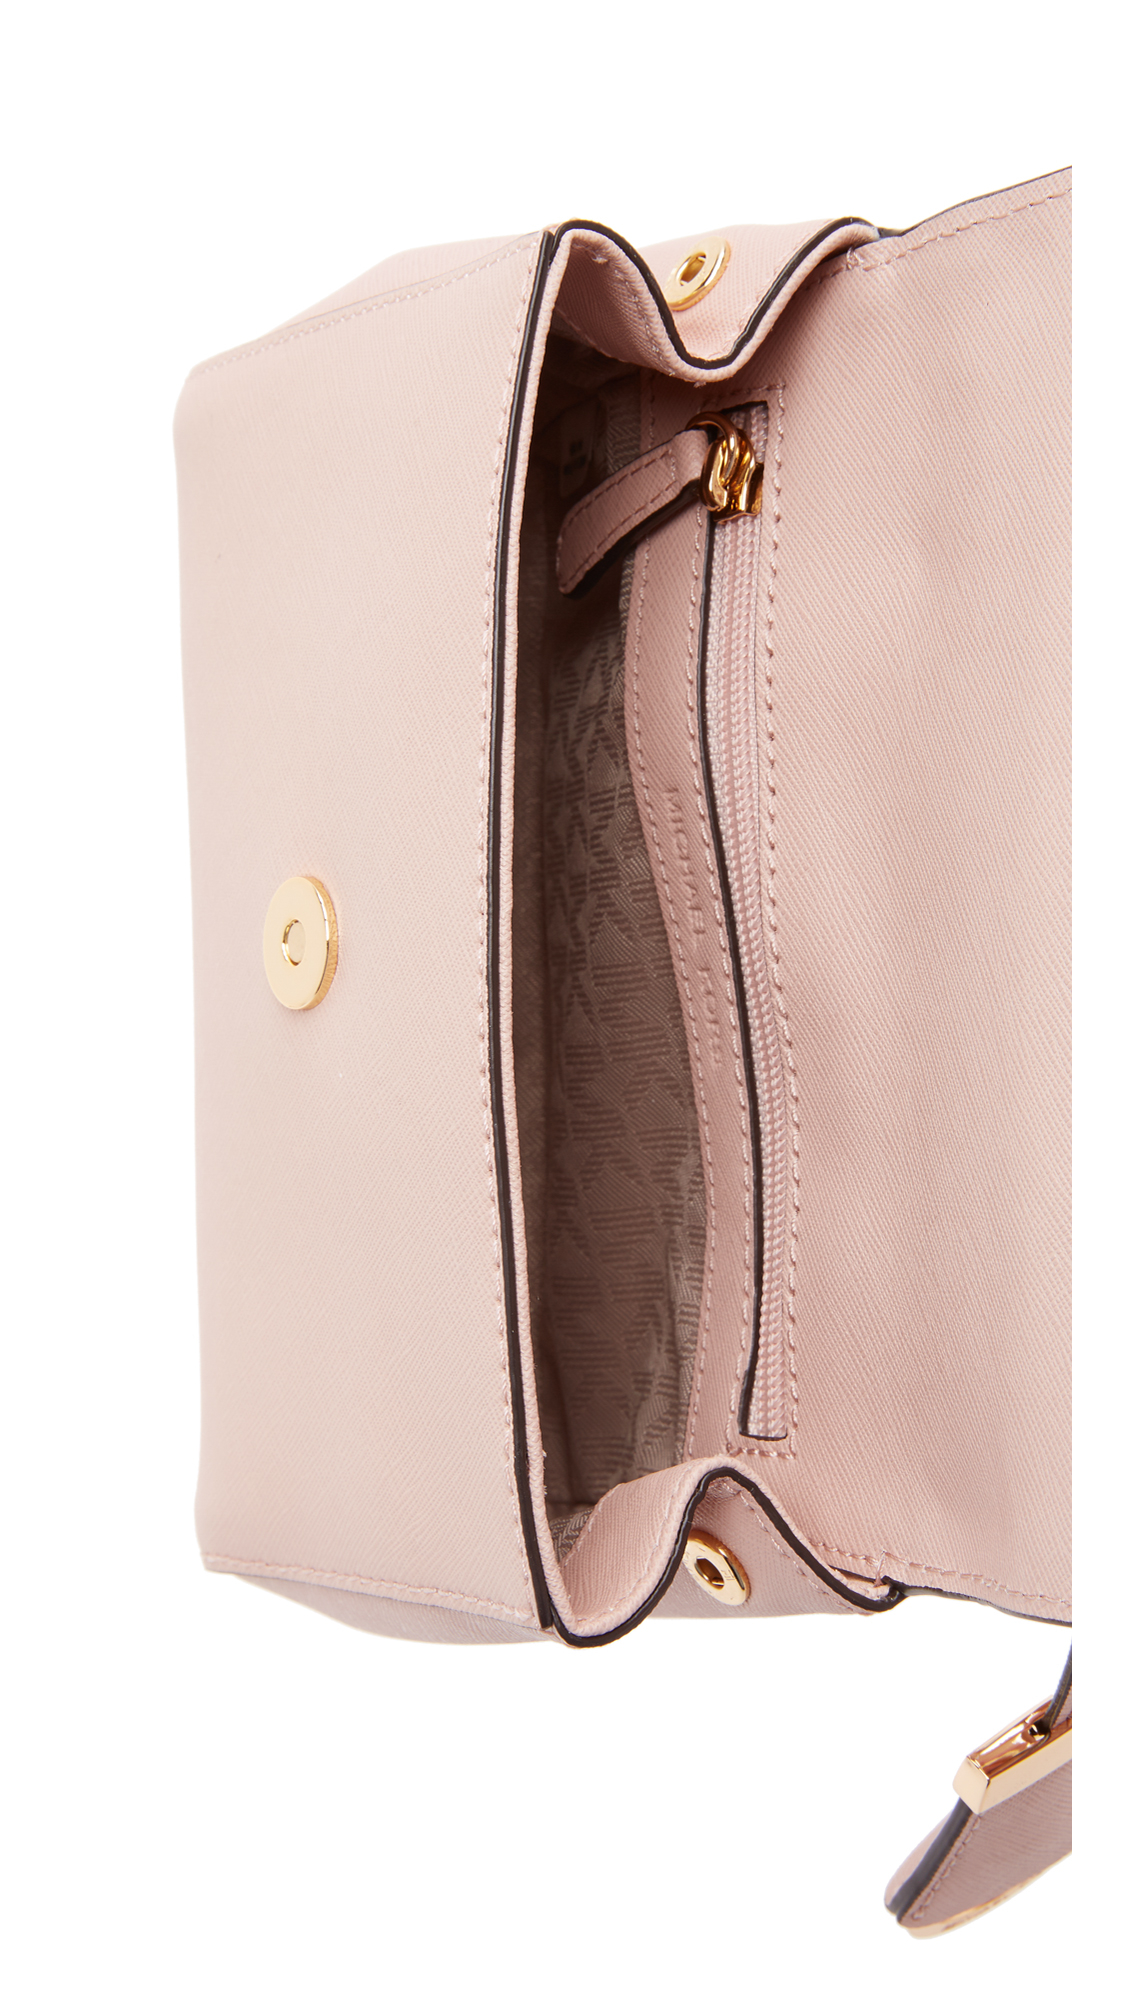 Ava leather crossbody bag Michael Kors Pink in Leather - 31843920